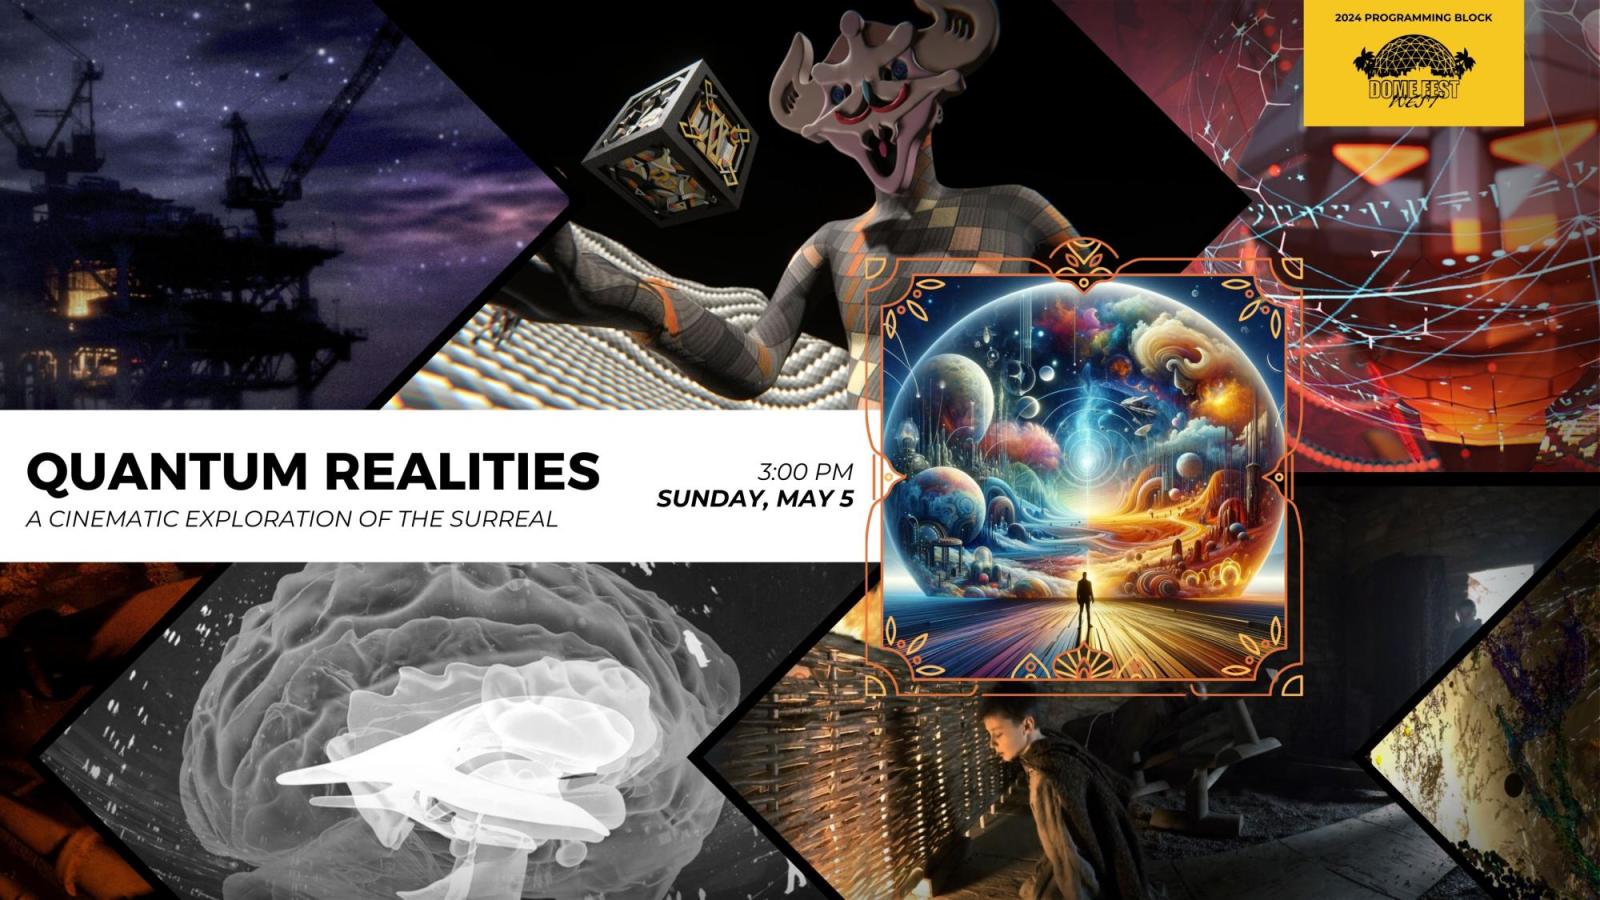 Quantum Realities text with Dome Fest West logo and 7 still images from films